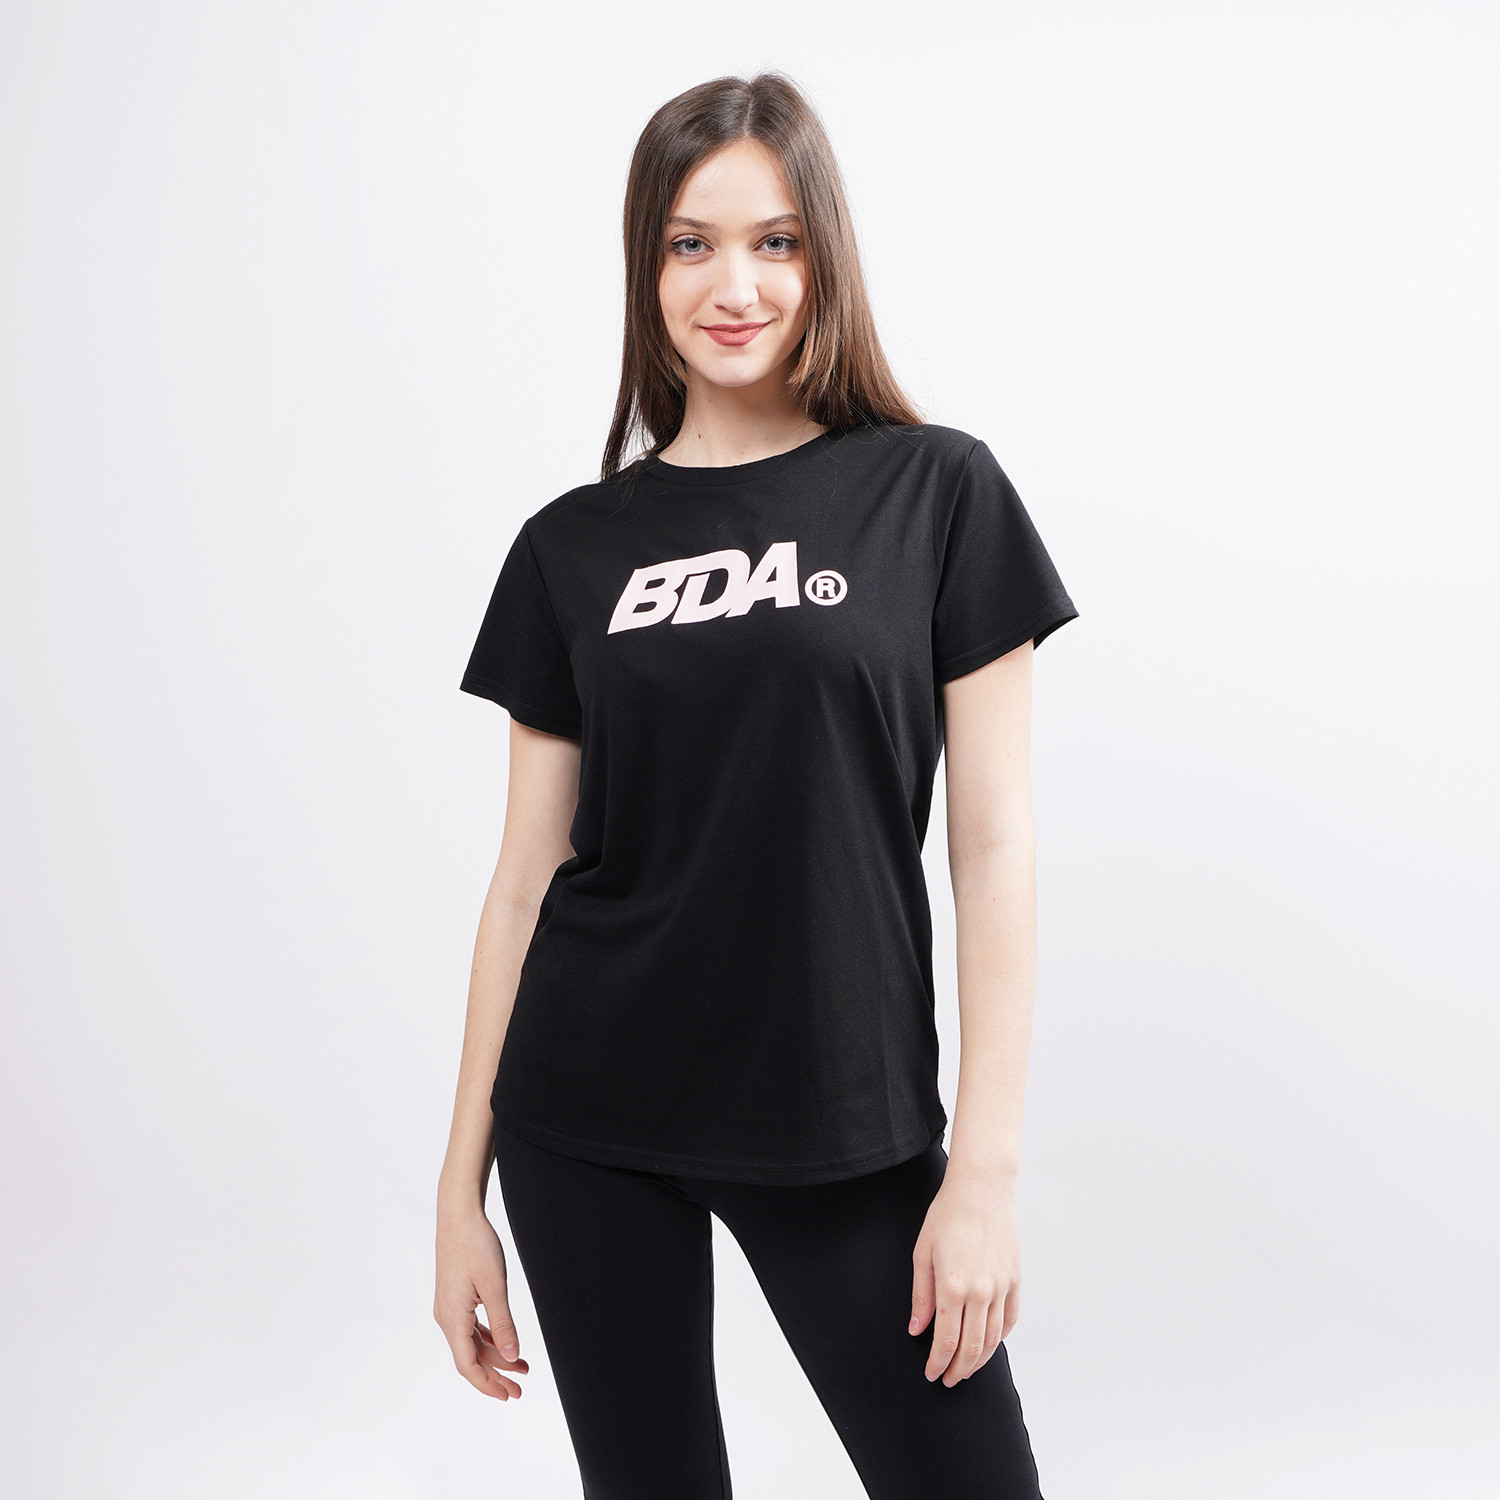 Body Action Actice Short T-shirt